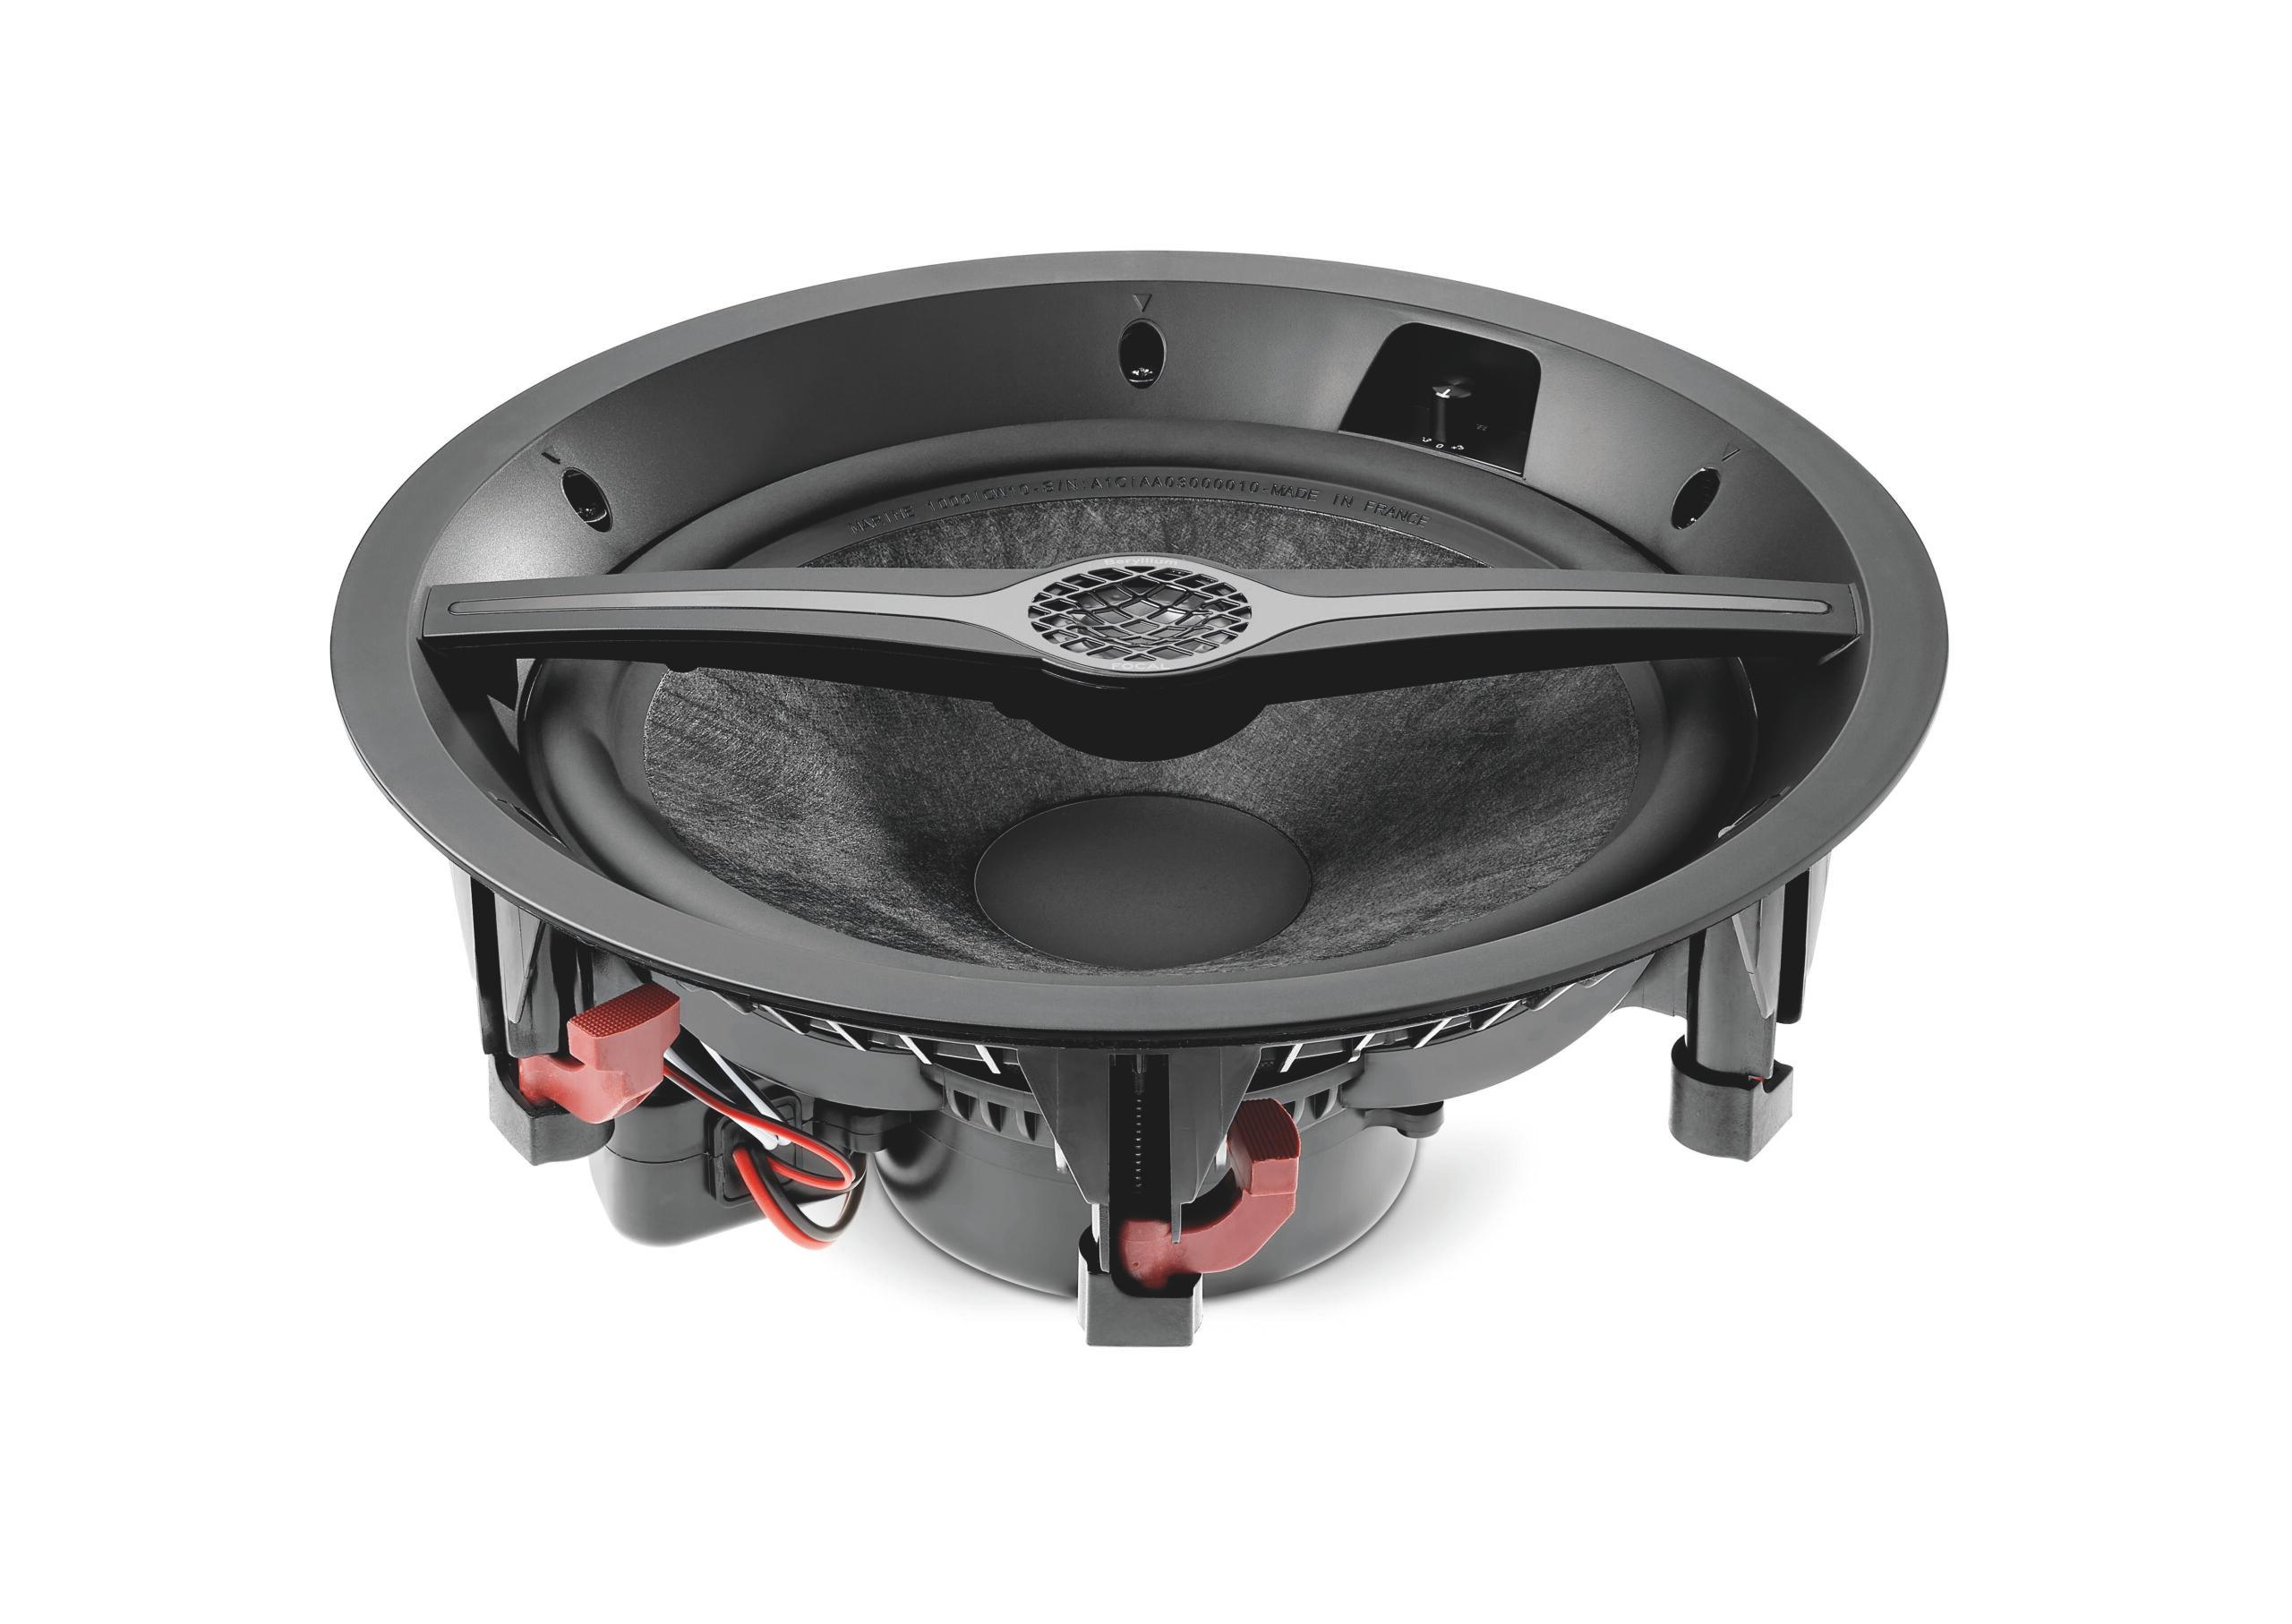 Focal's newest speaker line is designed for demanding saltwater environments, and include both full range and subwoofer models. 4c9b0905 1000 iwc10 littorae 34 scaled